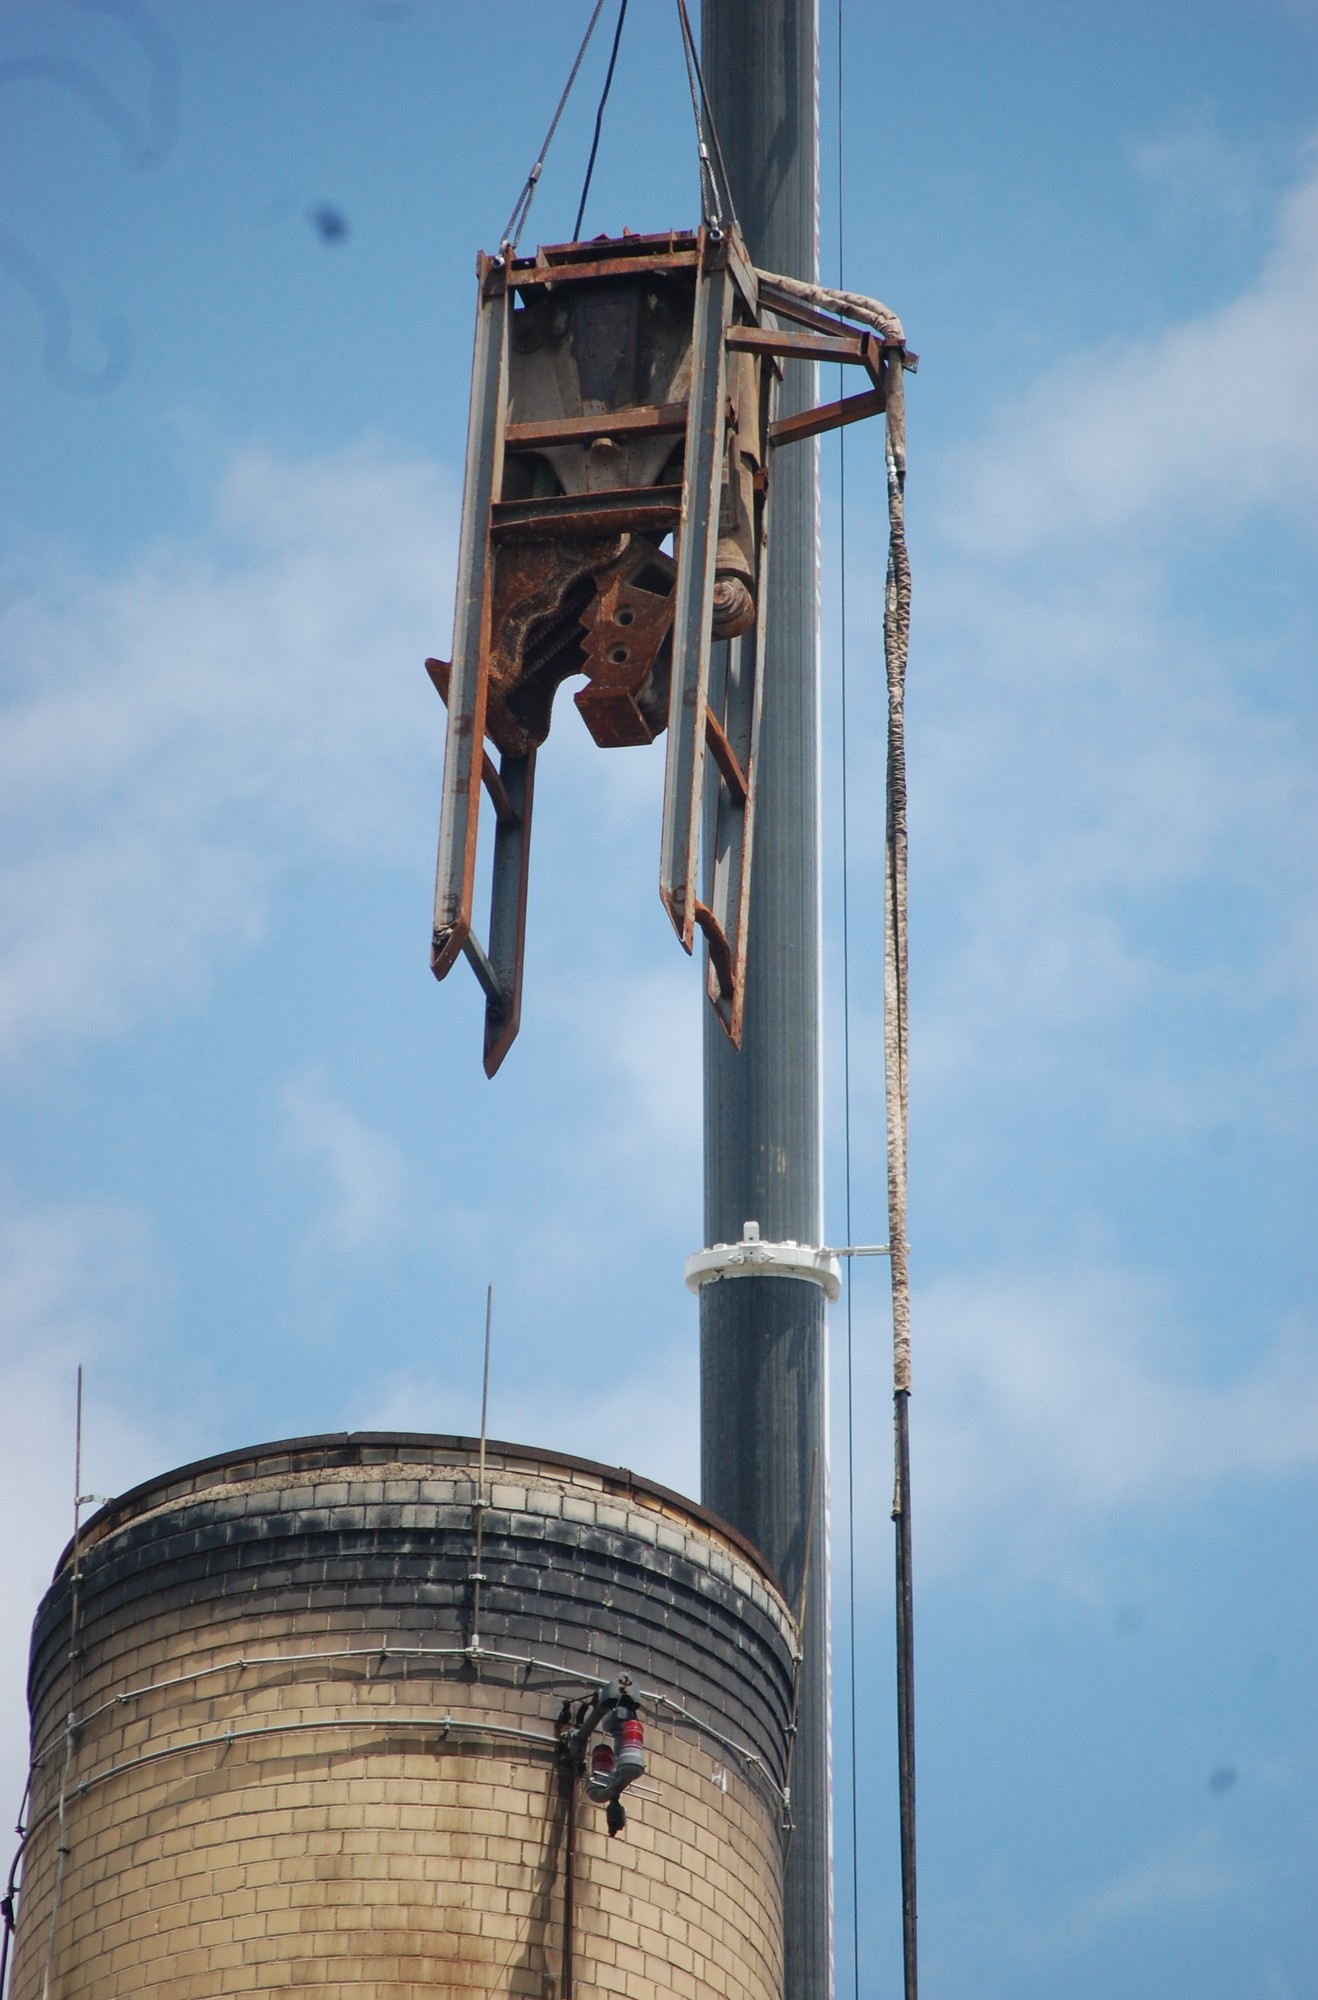 A crane lifted a piece of construction equipment into place to begin demolishing the smokestack.